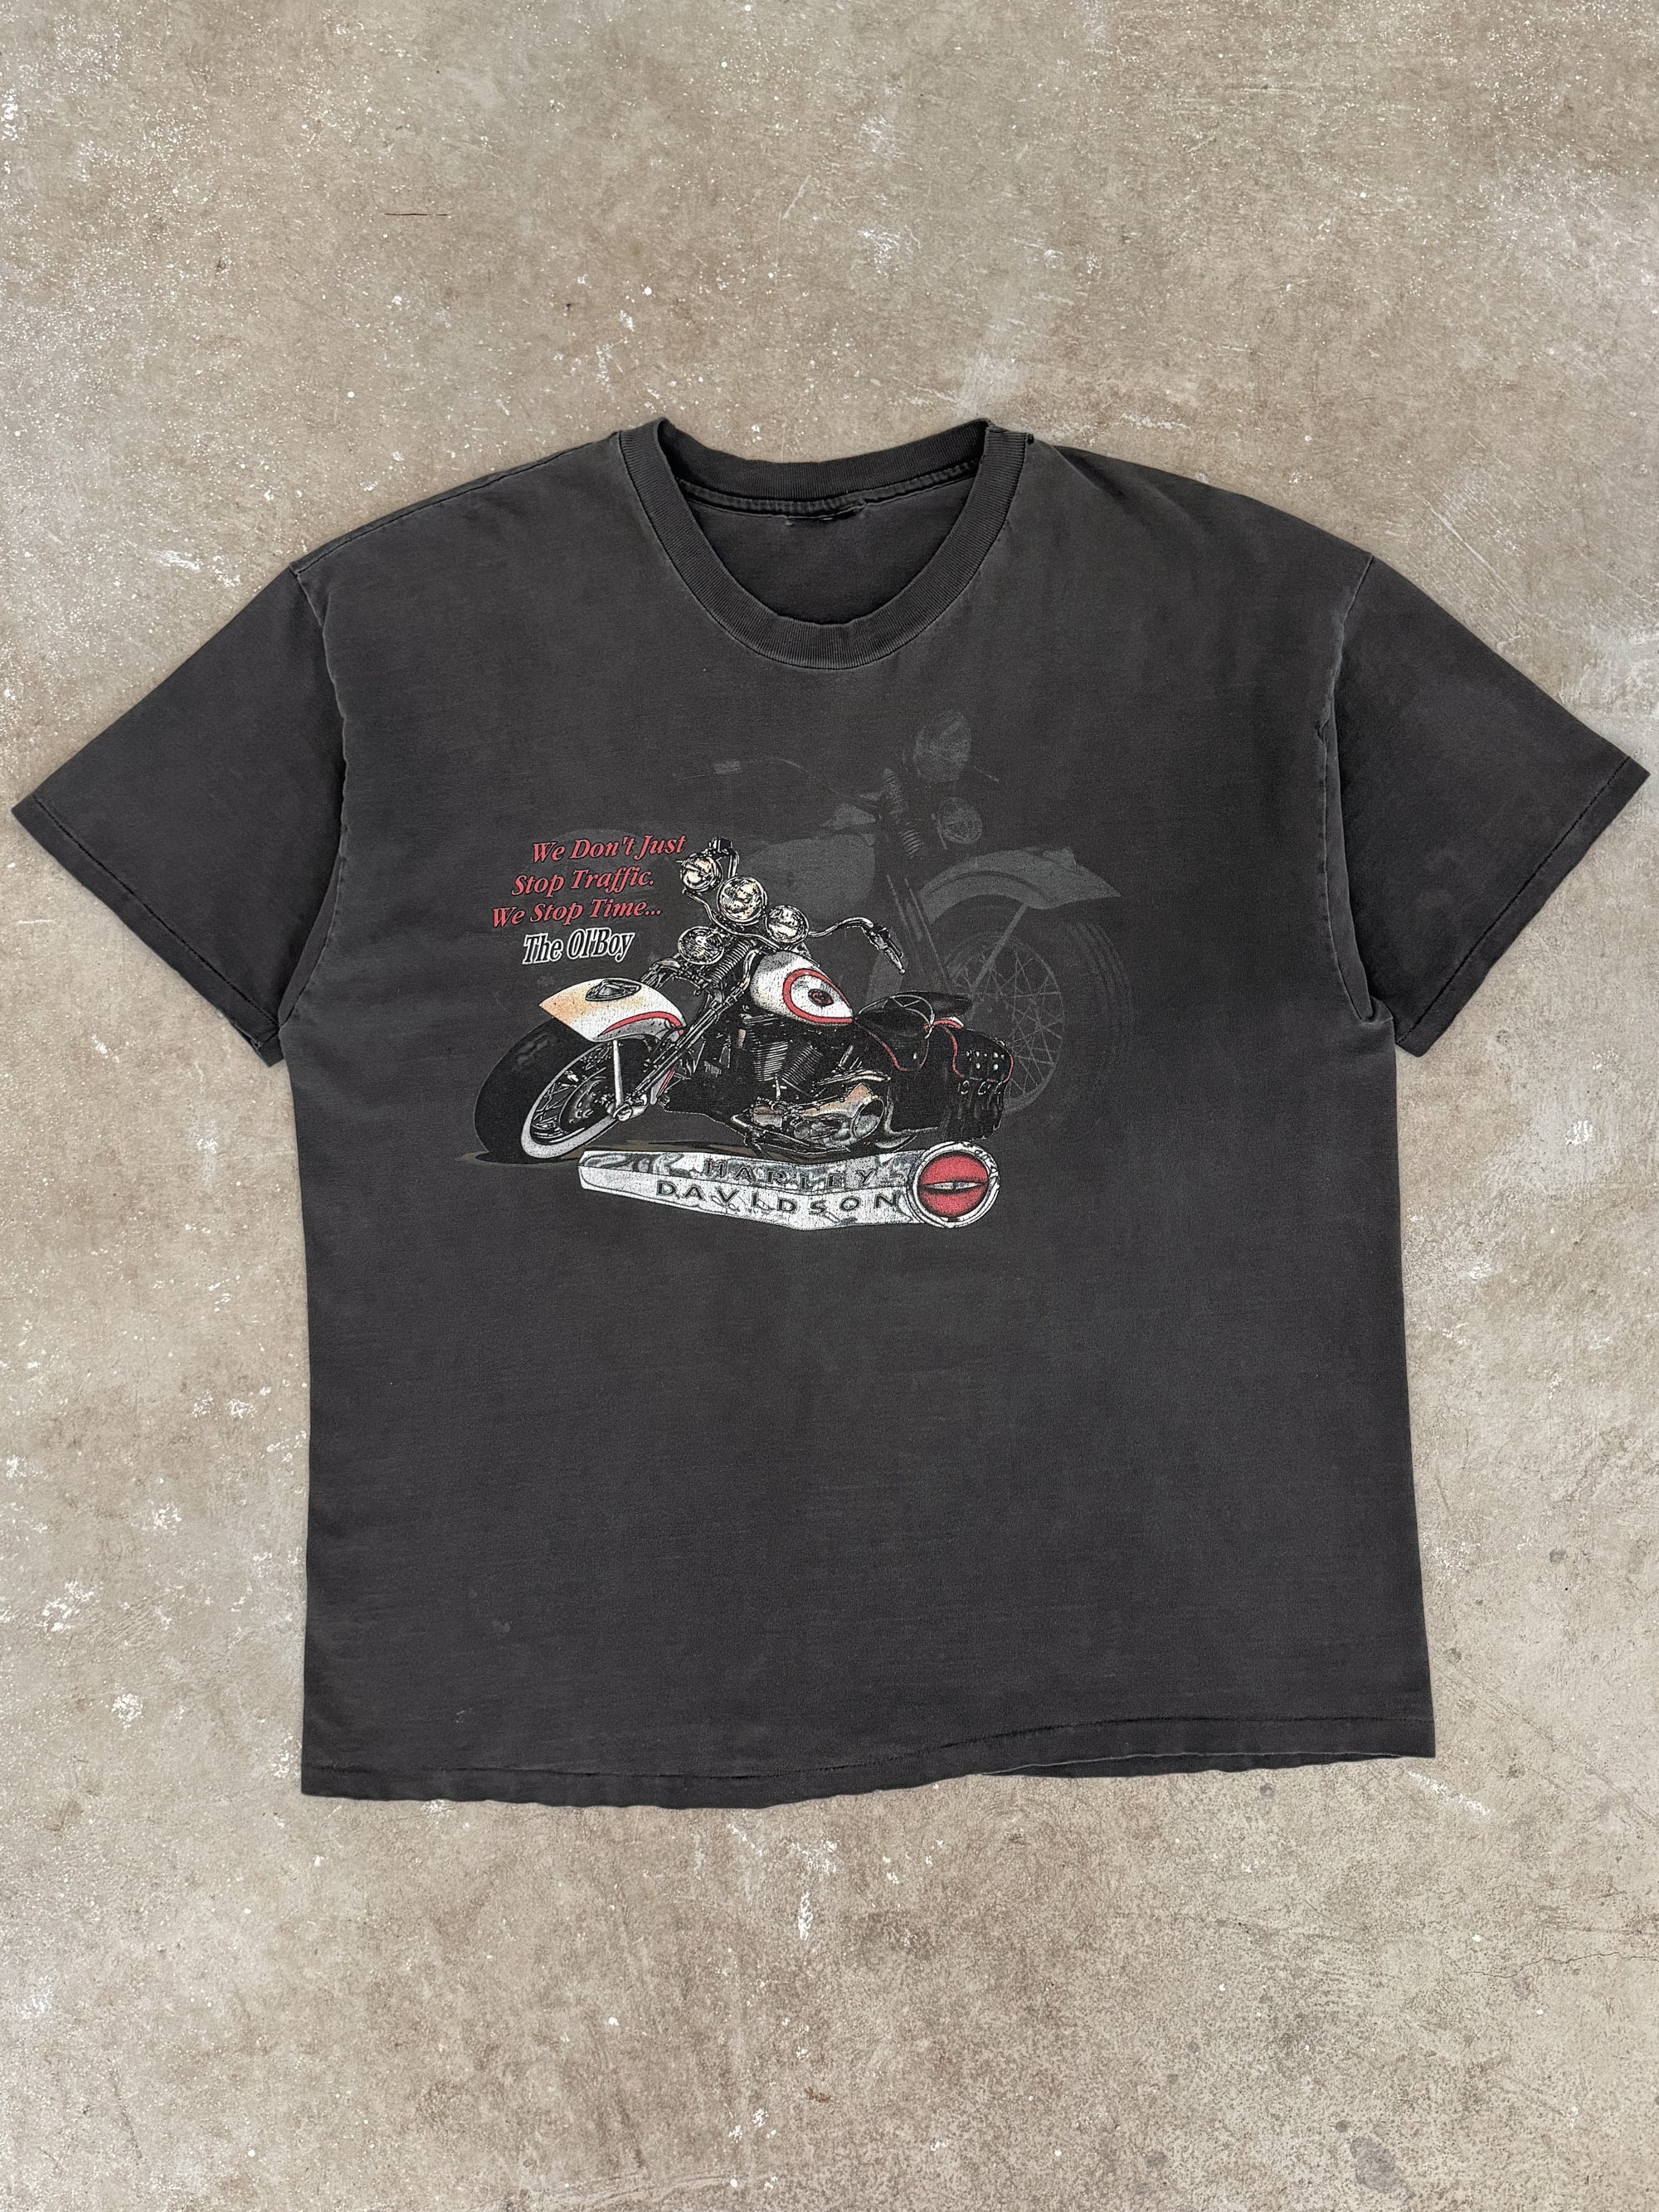 1990s "We Don't Just Stop Traffic..." Harley Davidson Tee (XL)